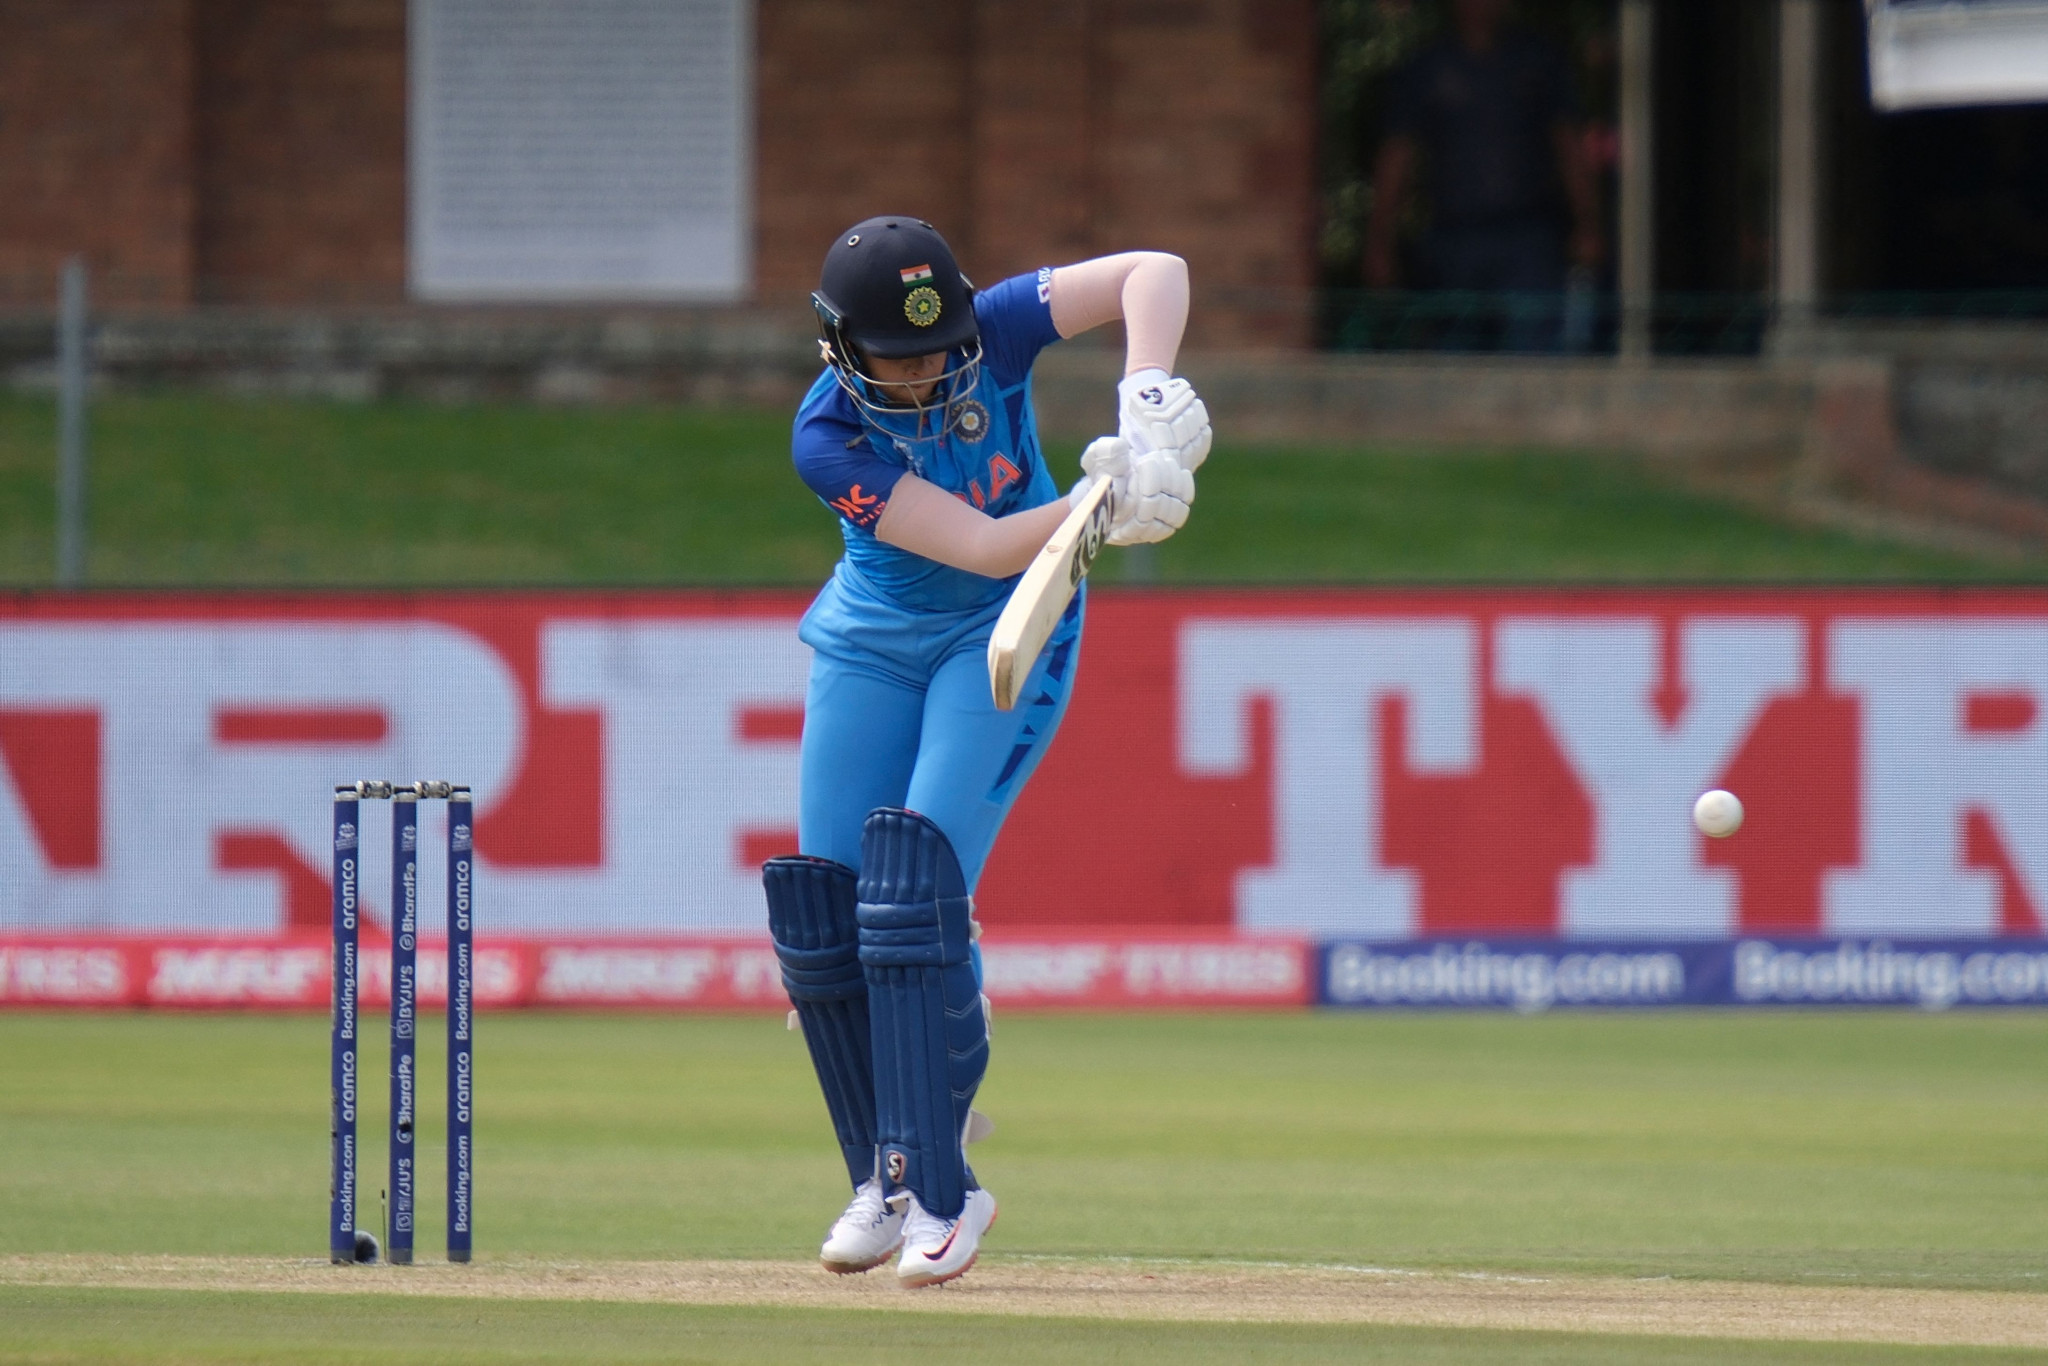 India secure semi-final place at ICC Women’s T20 World Cup after victory in rain-reduced game